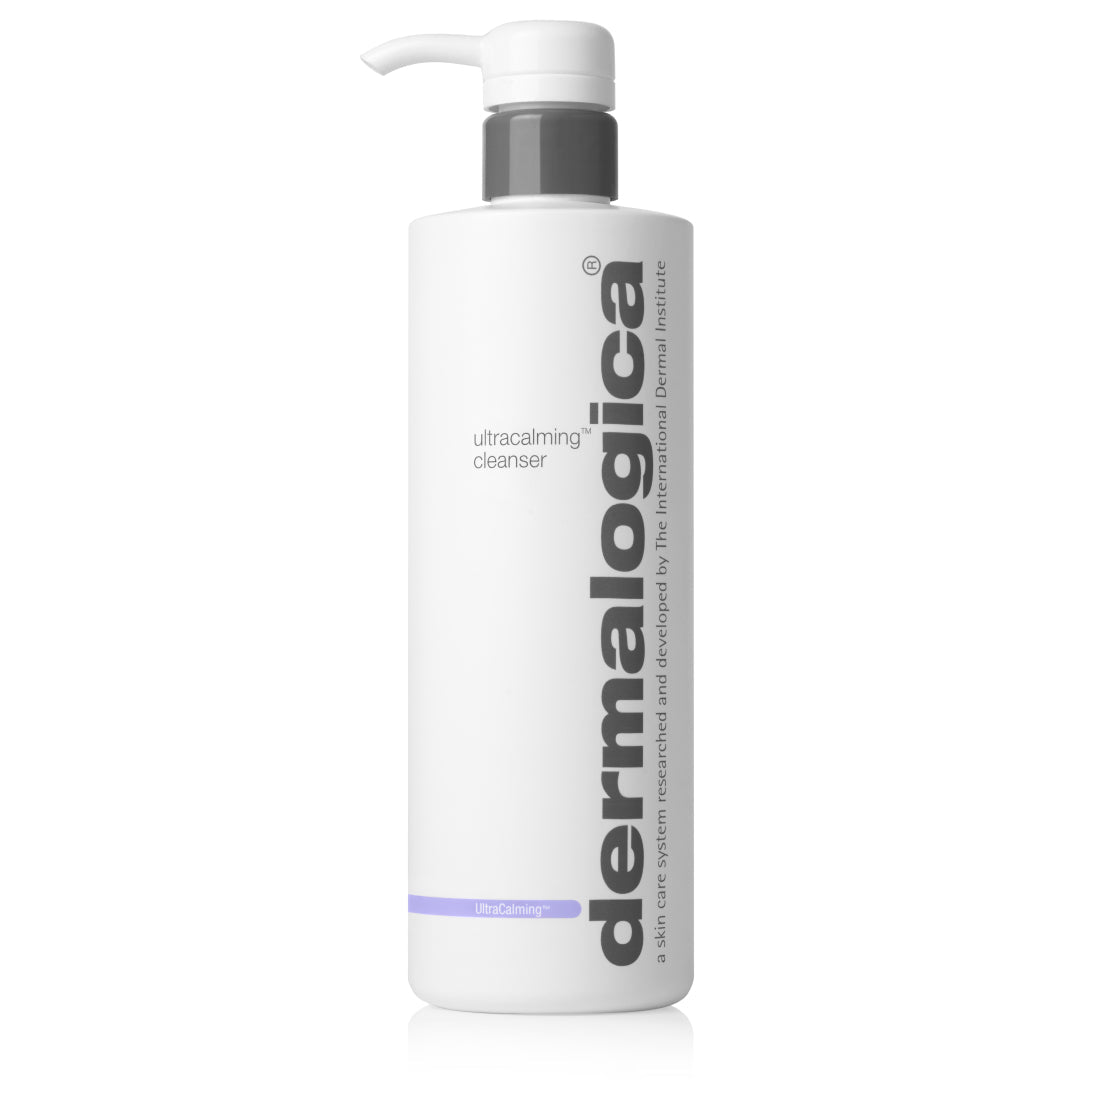 Dermalogica Ultracalming cleanser image  (7156821655712)